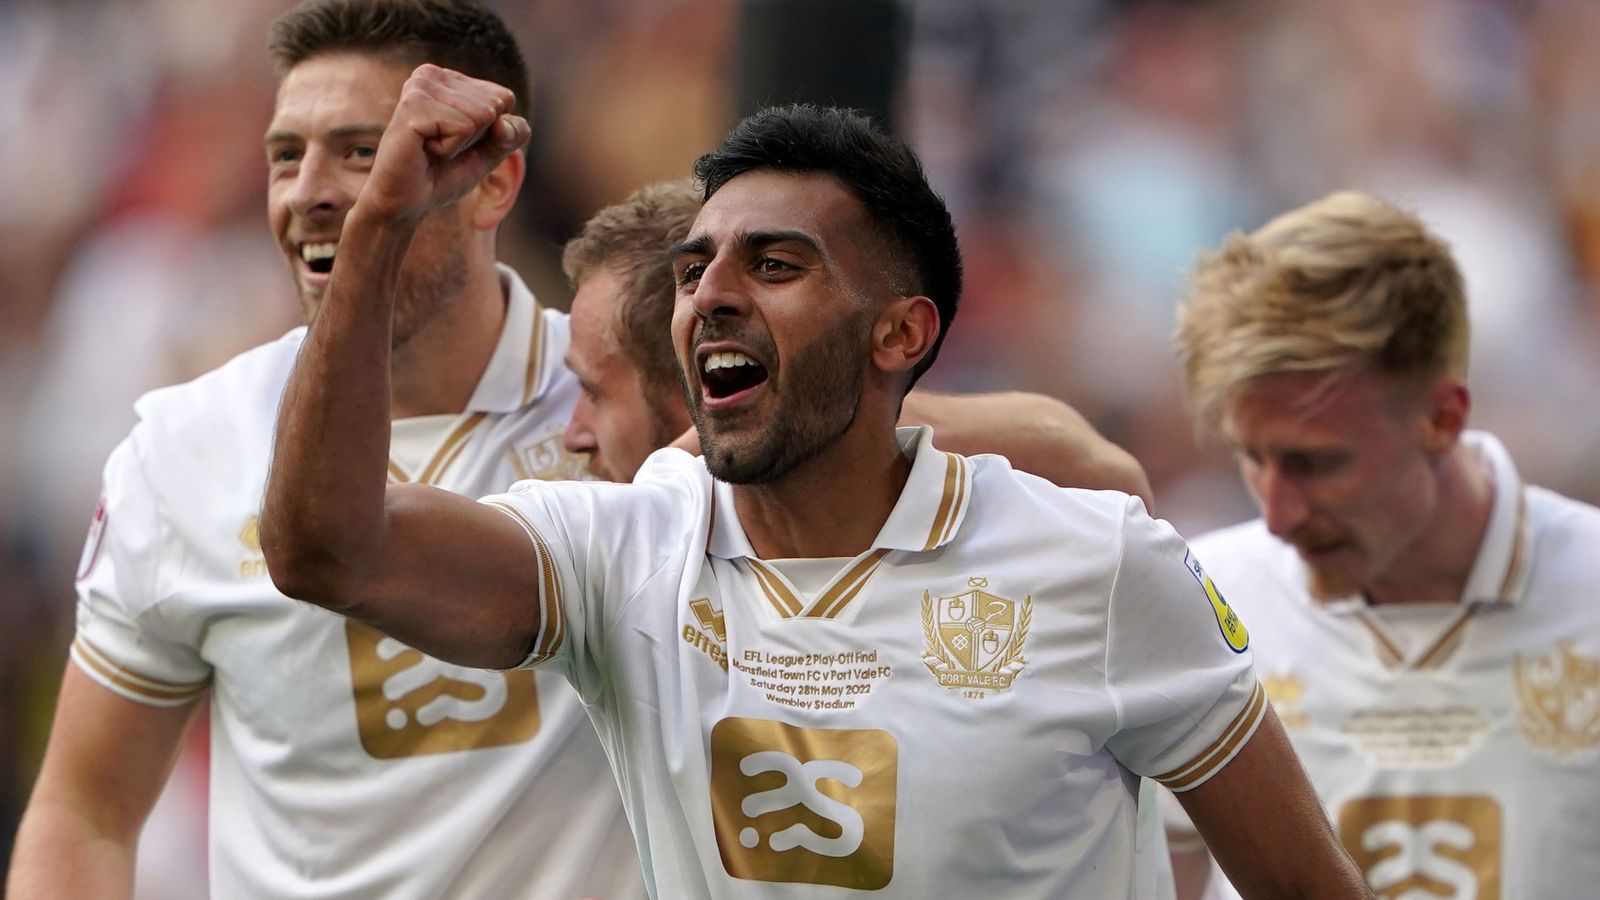 Port Vale play-off hero Mal Benning a pioneer for British South Asians in football, says Jobi McAnuff